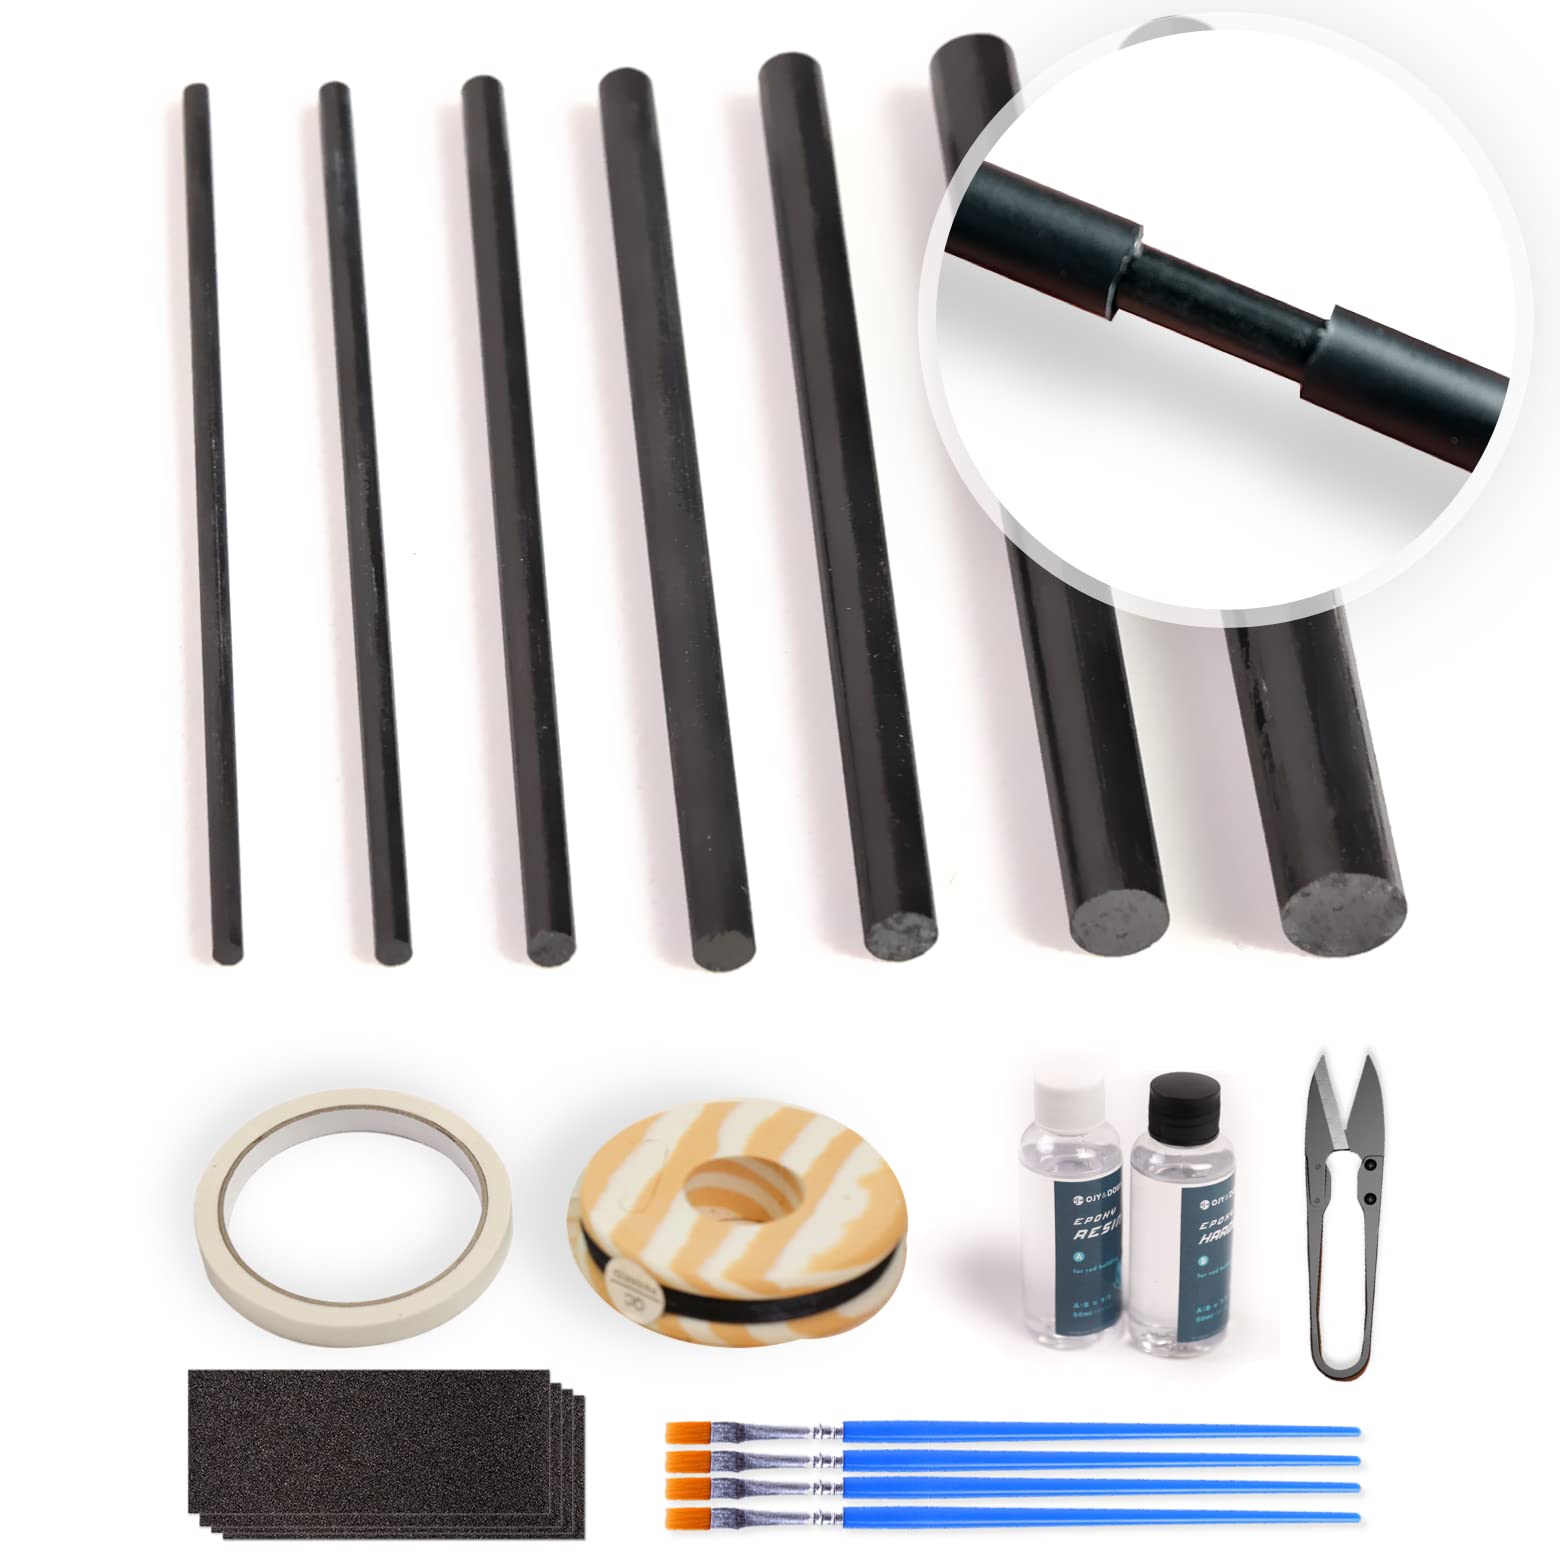 Fishing Rod Repair Kit Complete,All-in-one Supplies with Glue for  Freshwater & Saltwater Broken Fishing Pole Repair with Carbon Fiber Sticks, Rod Building Epoxy Finish Inserts-Kit